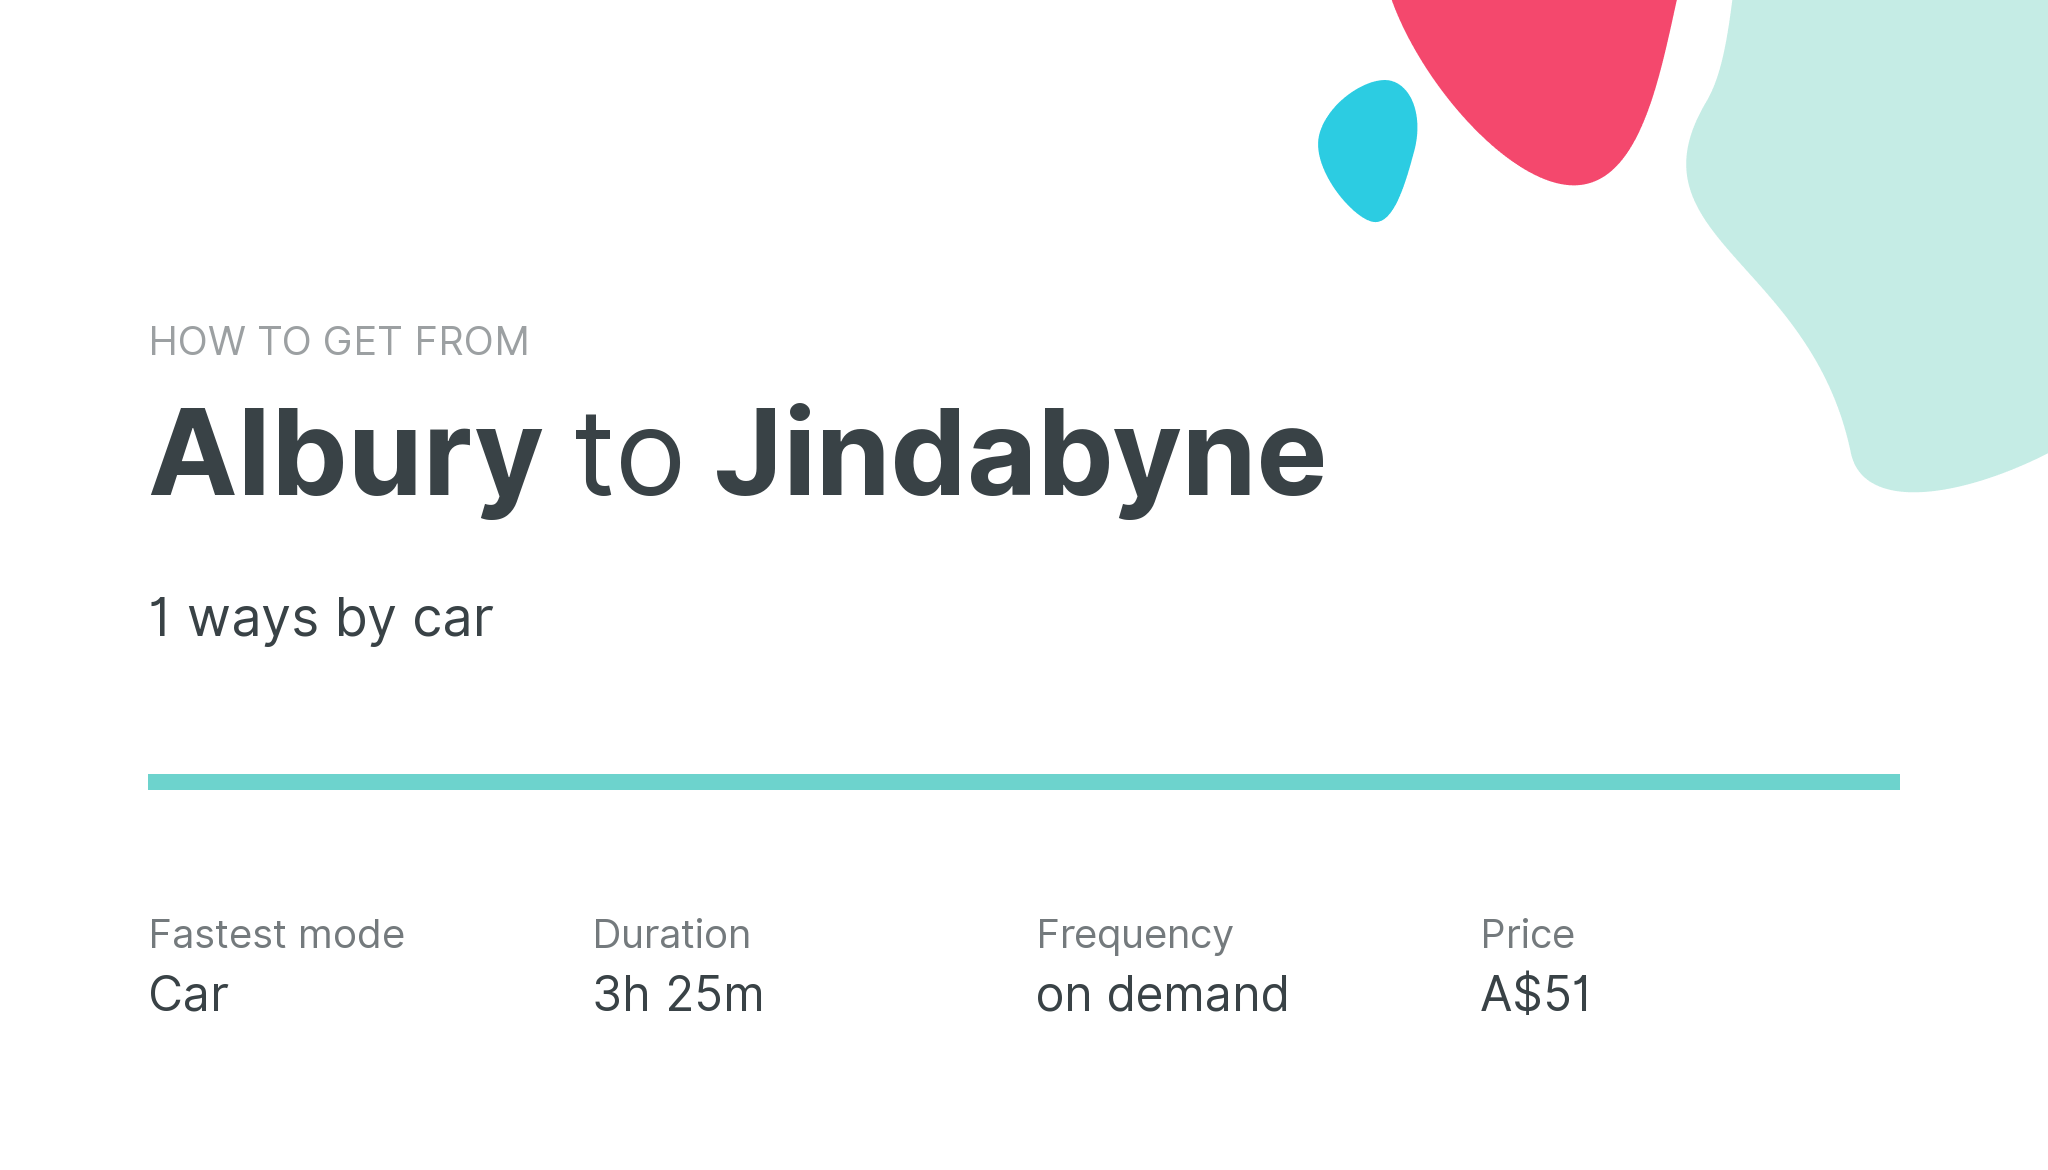 How do I get from Albury to Jindabyne